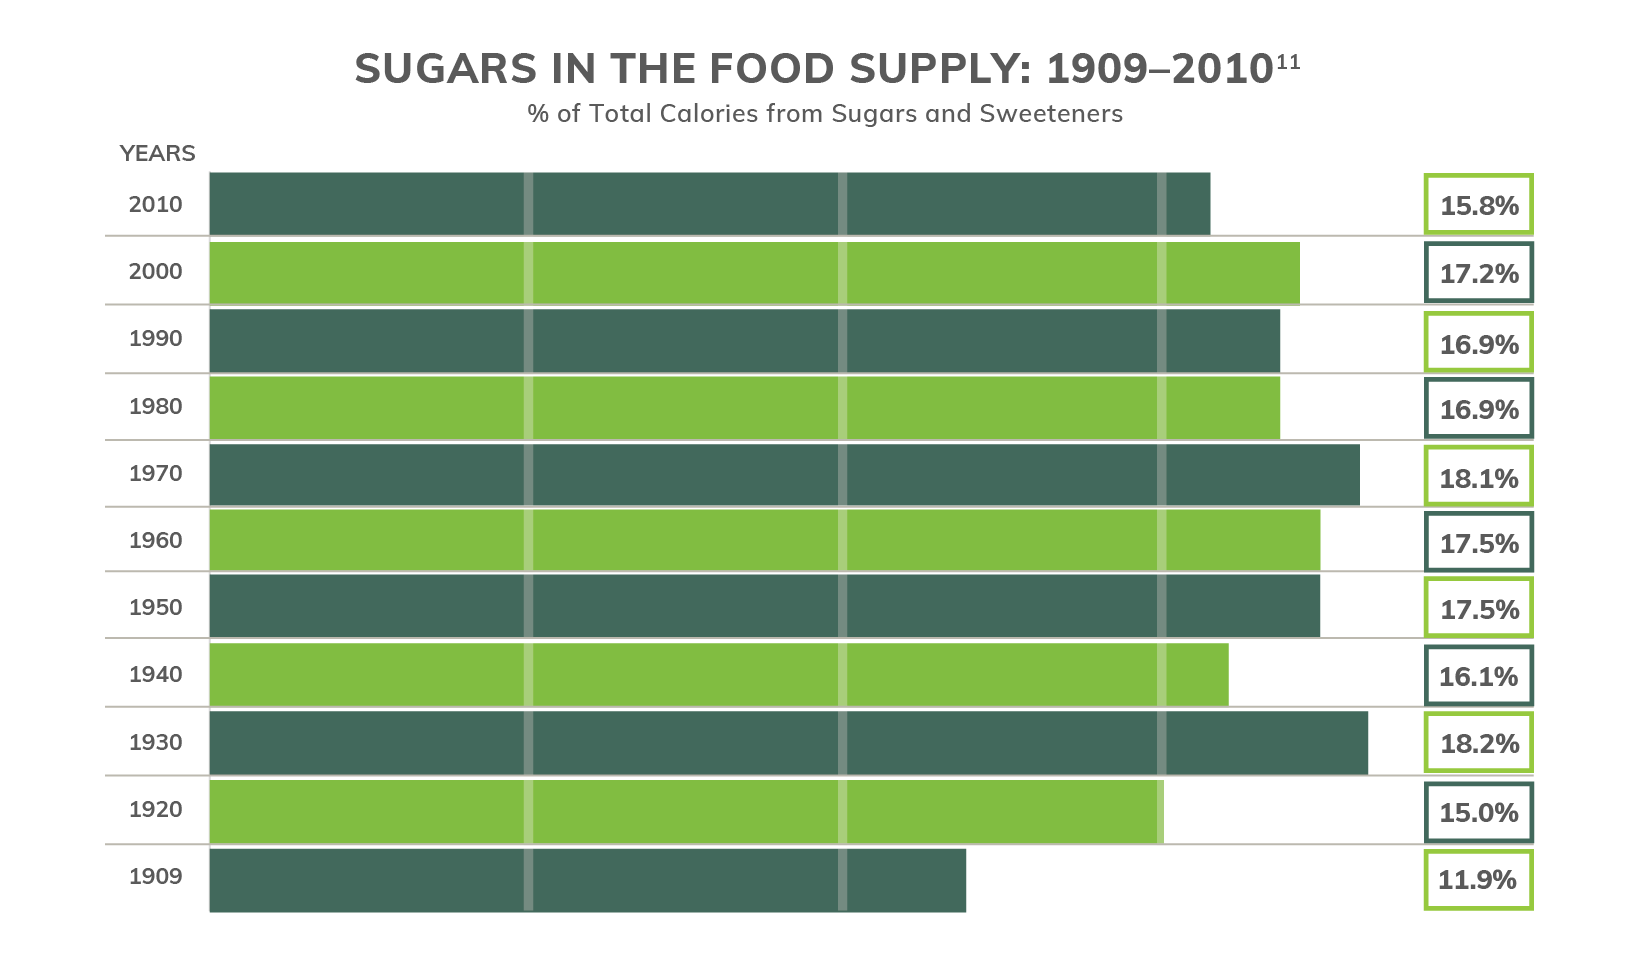 Sugars in the Food Supply 1909-2010